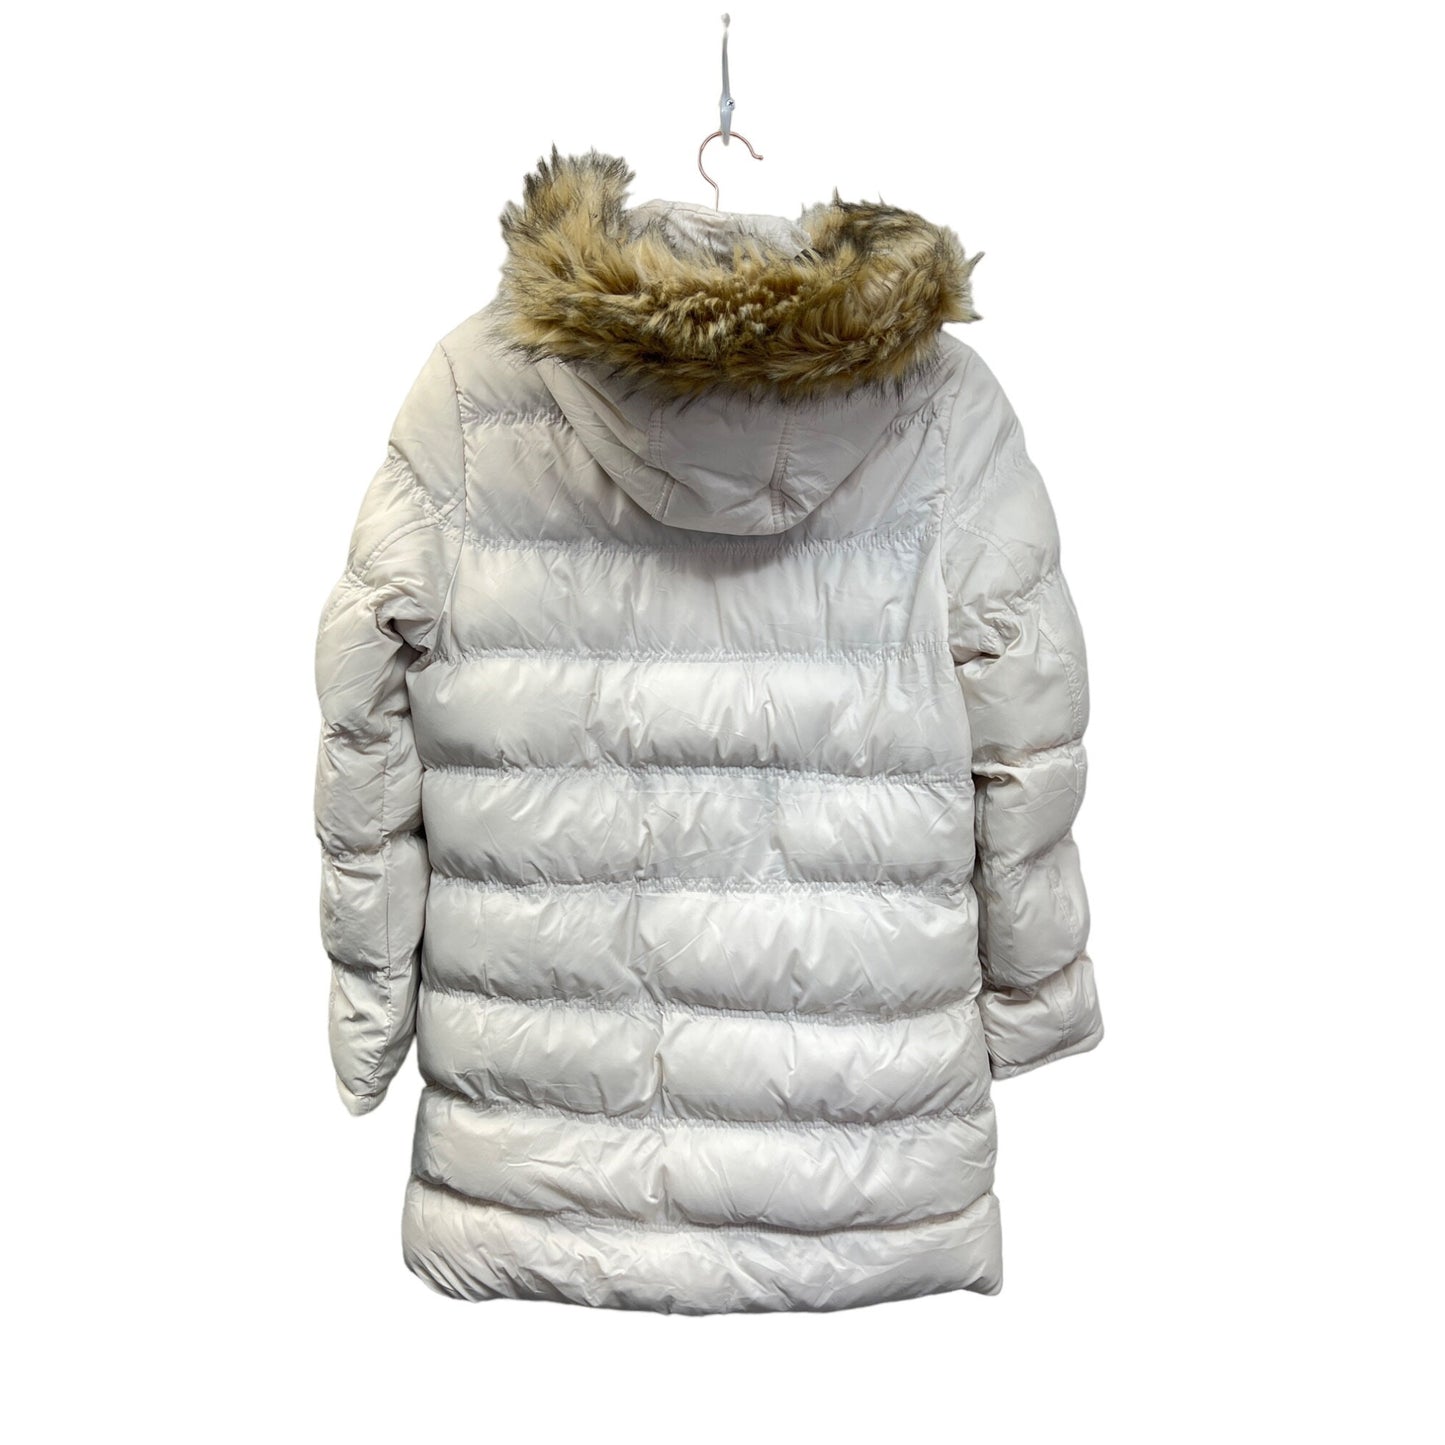 Marc New York Long White Puffer with Faux Fur Hoodie